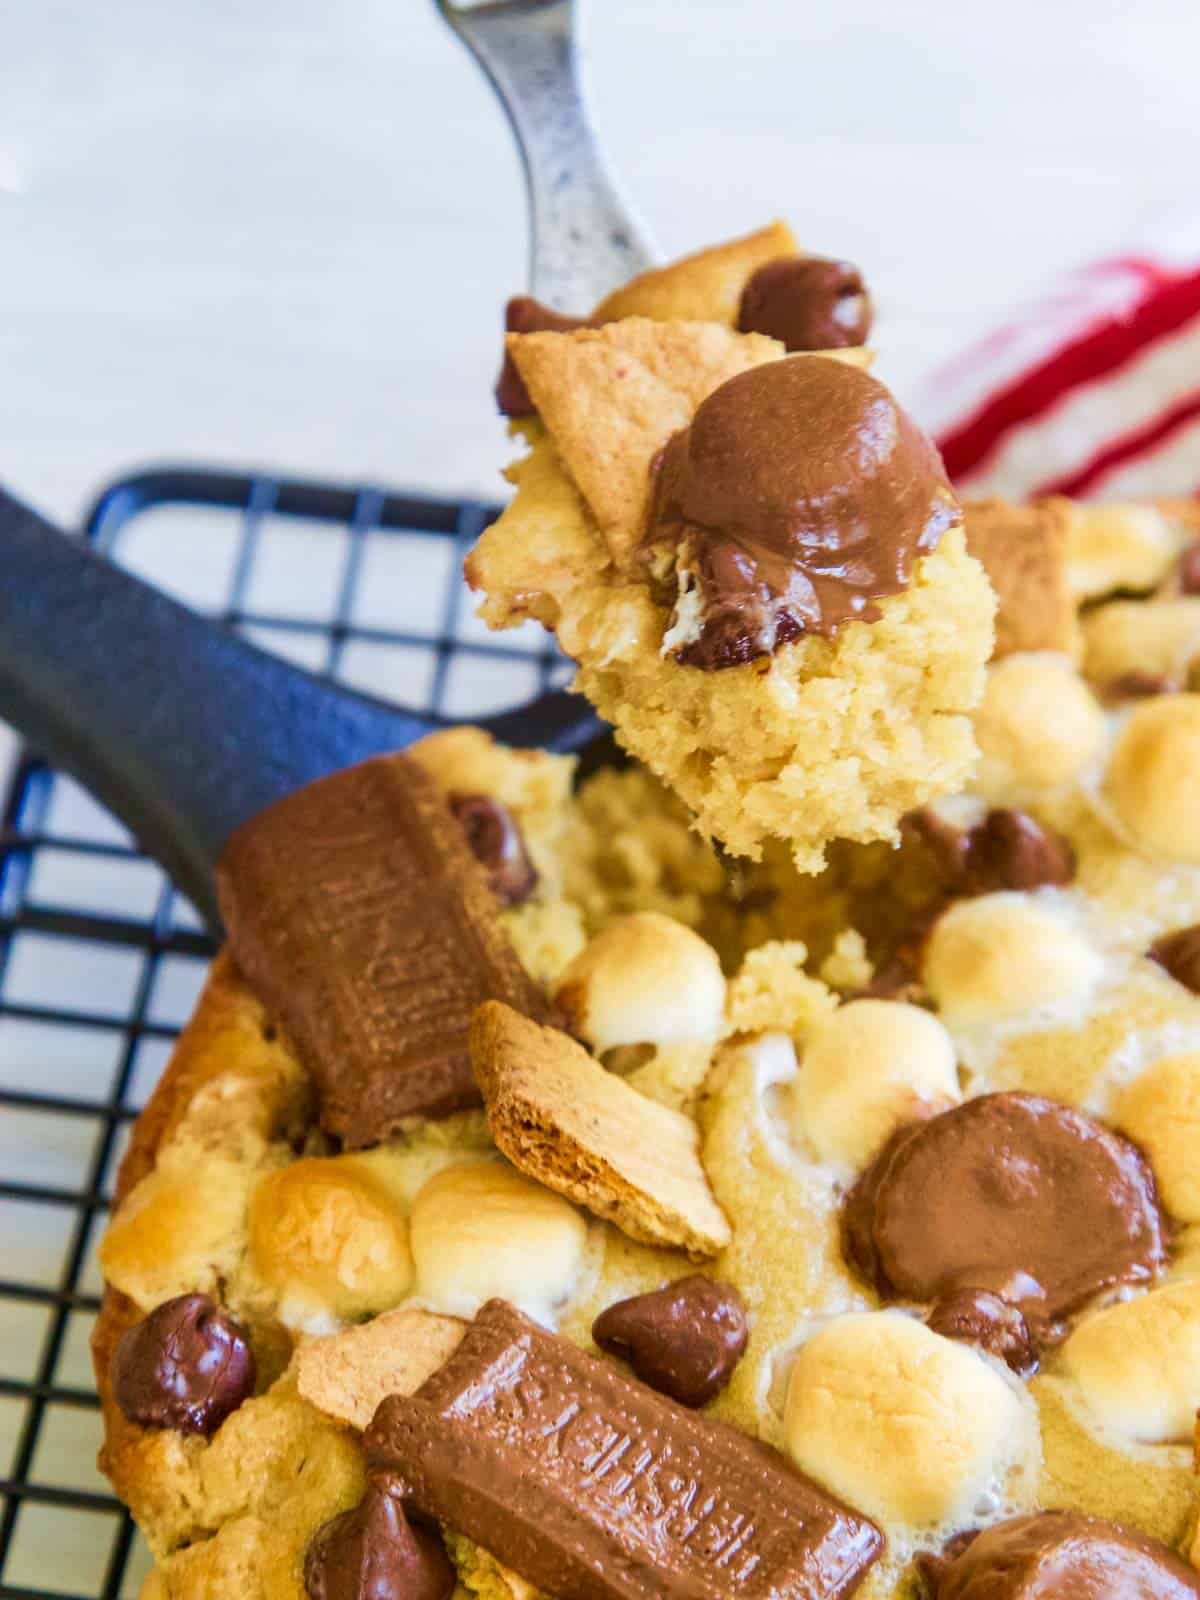 https://www.delicioustable.com/wp-content/uploads/2022/05/A-fork-lifting-up-a-bite-of-Smore-Pizookie-Skillet-Cookies.jpg